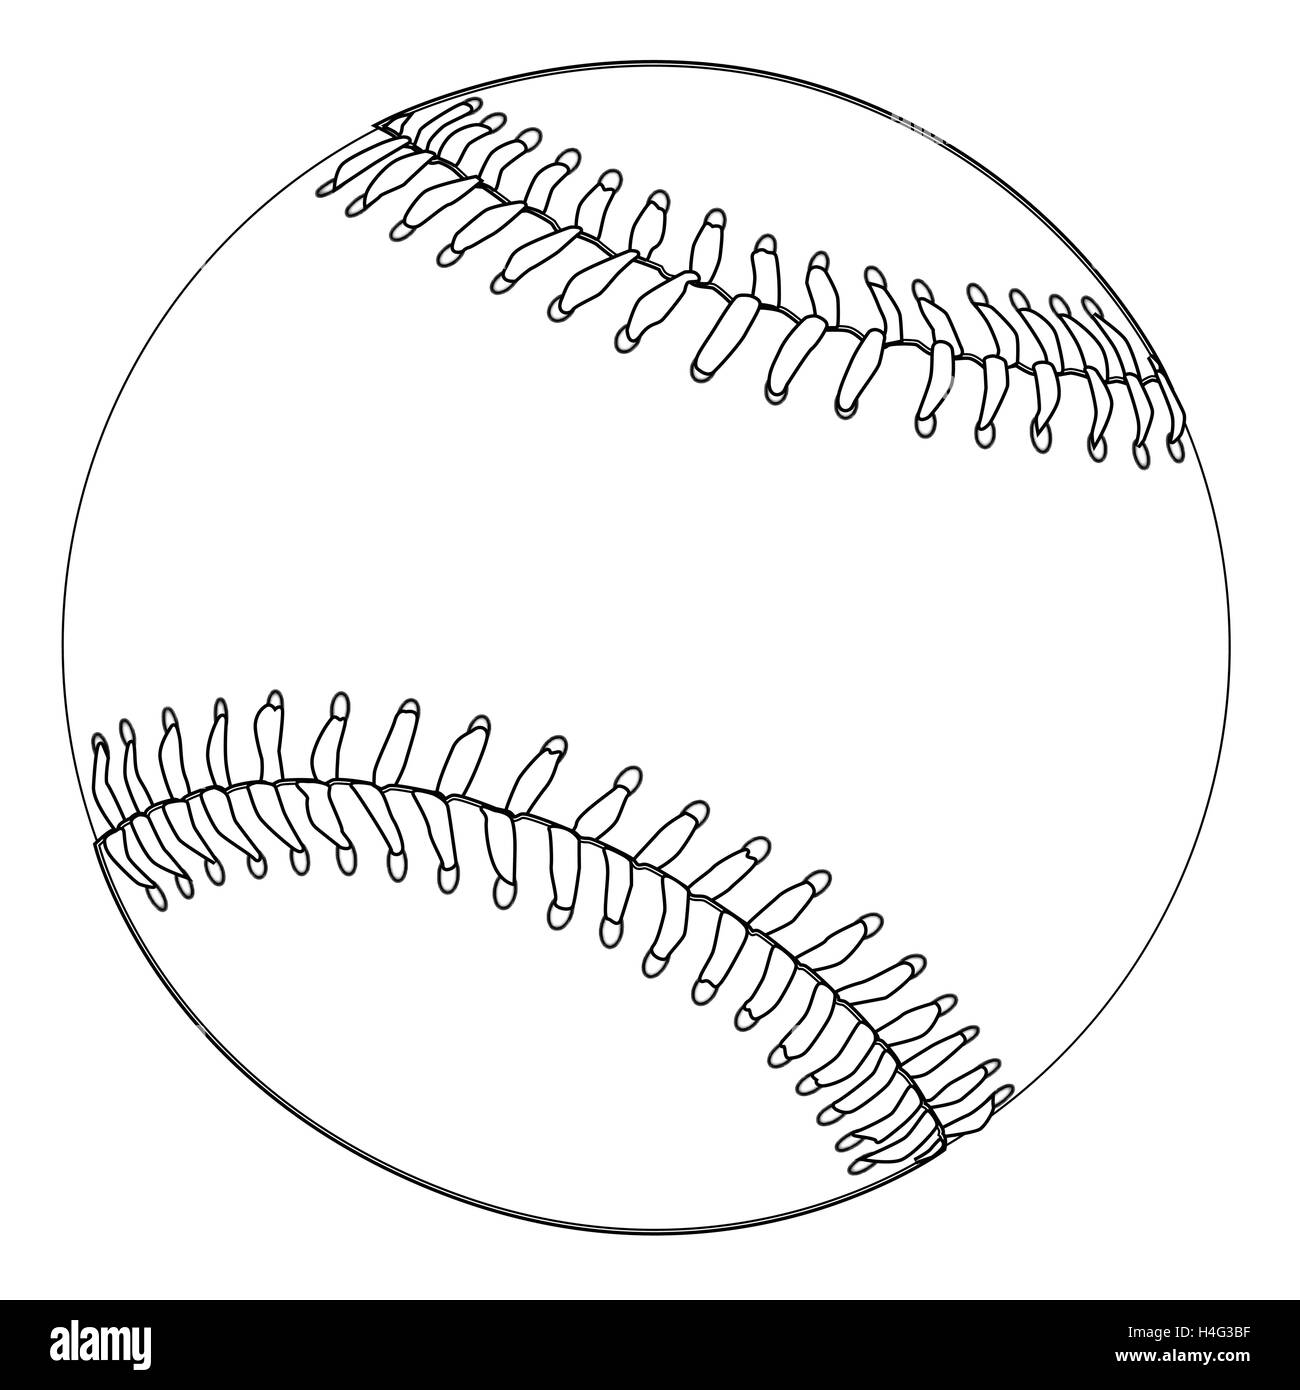 White baseball line drawing over a white background Stock Vector Image